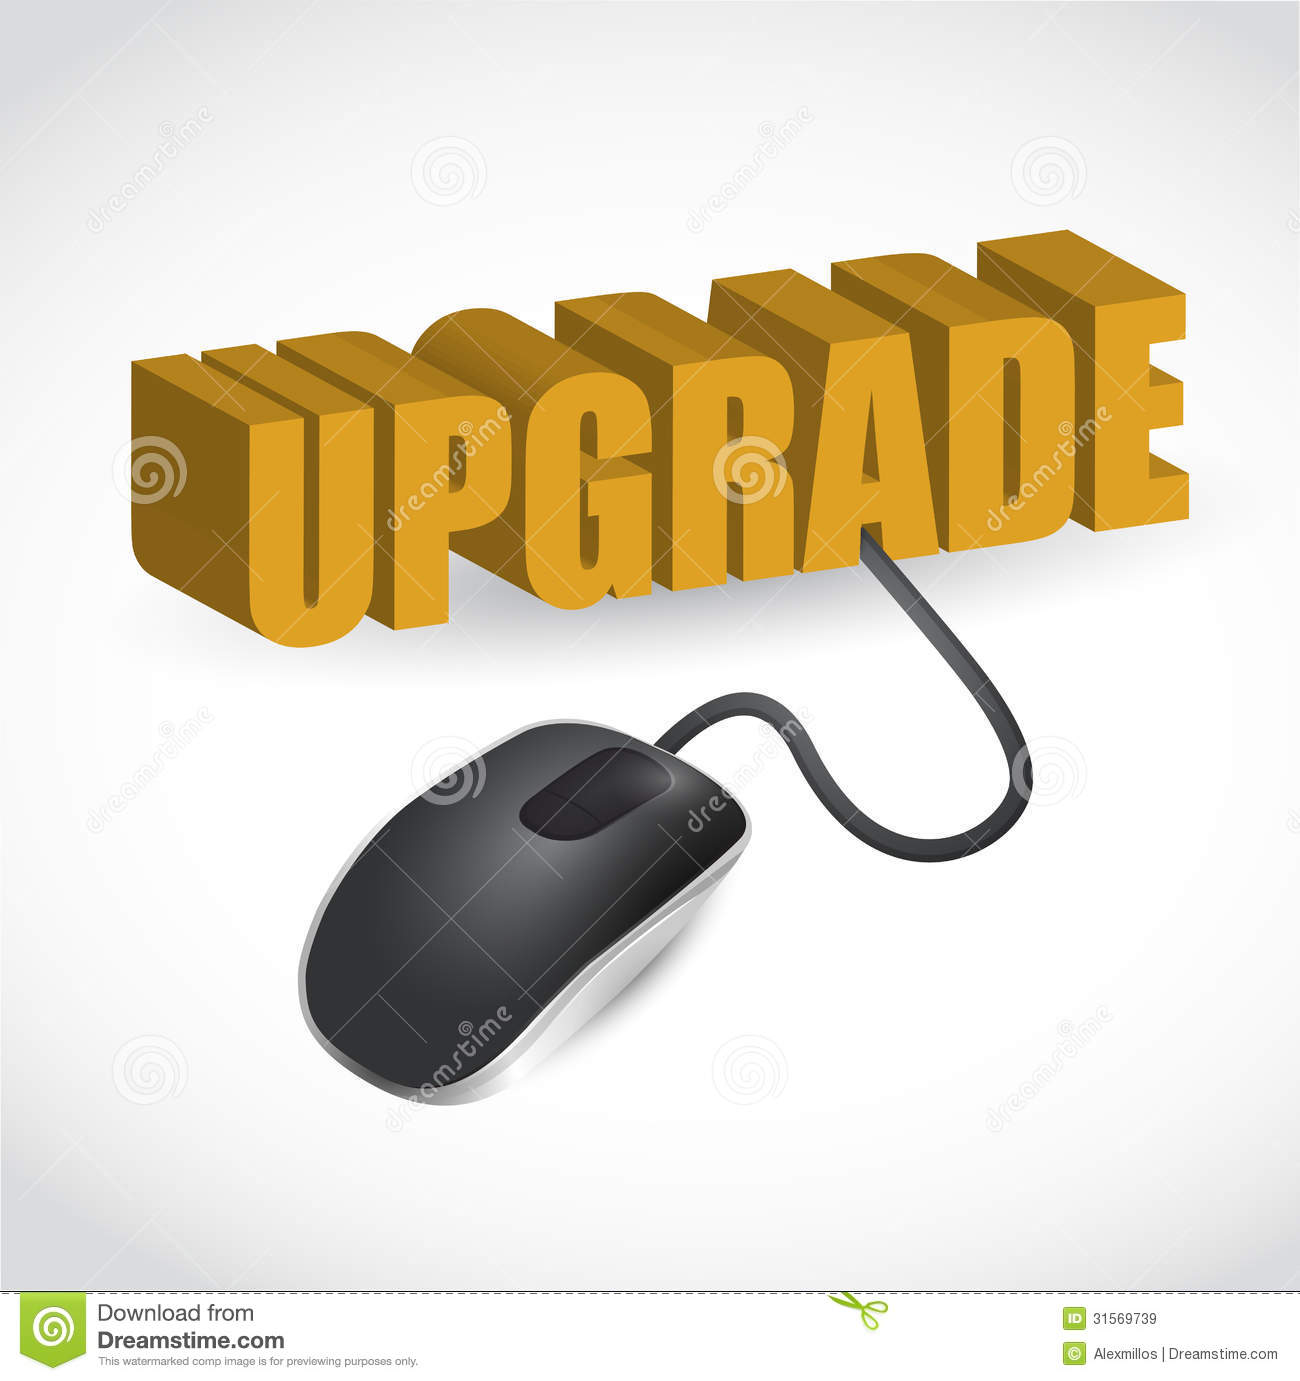 Connected To The Orange Word Upgrade Royalty Free Stock Images   Image    